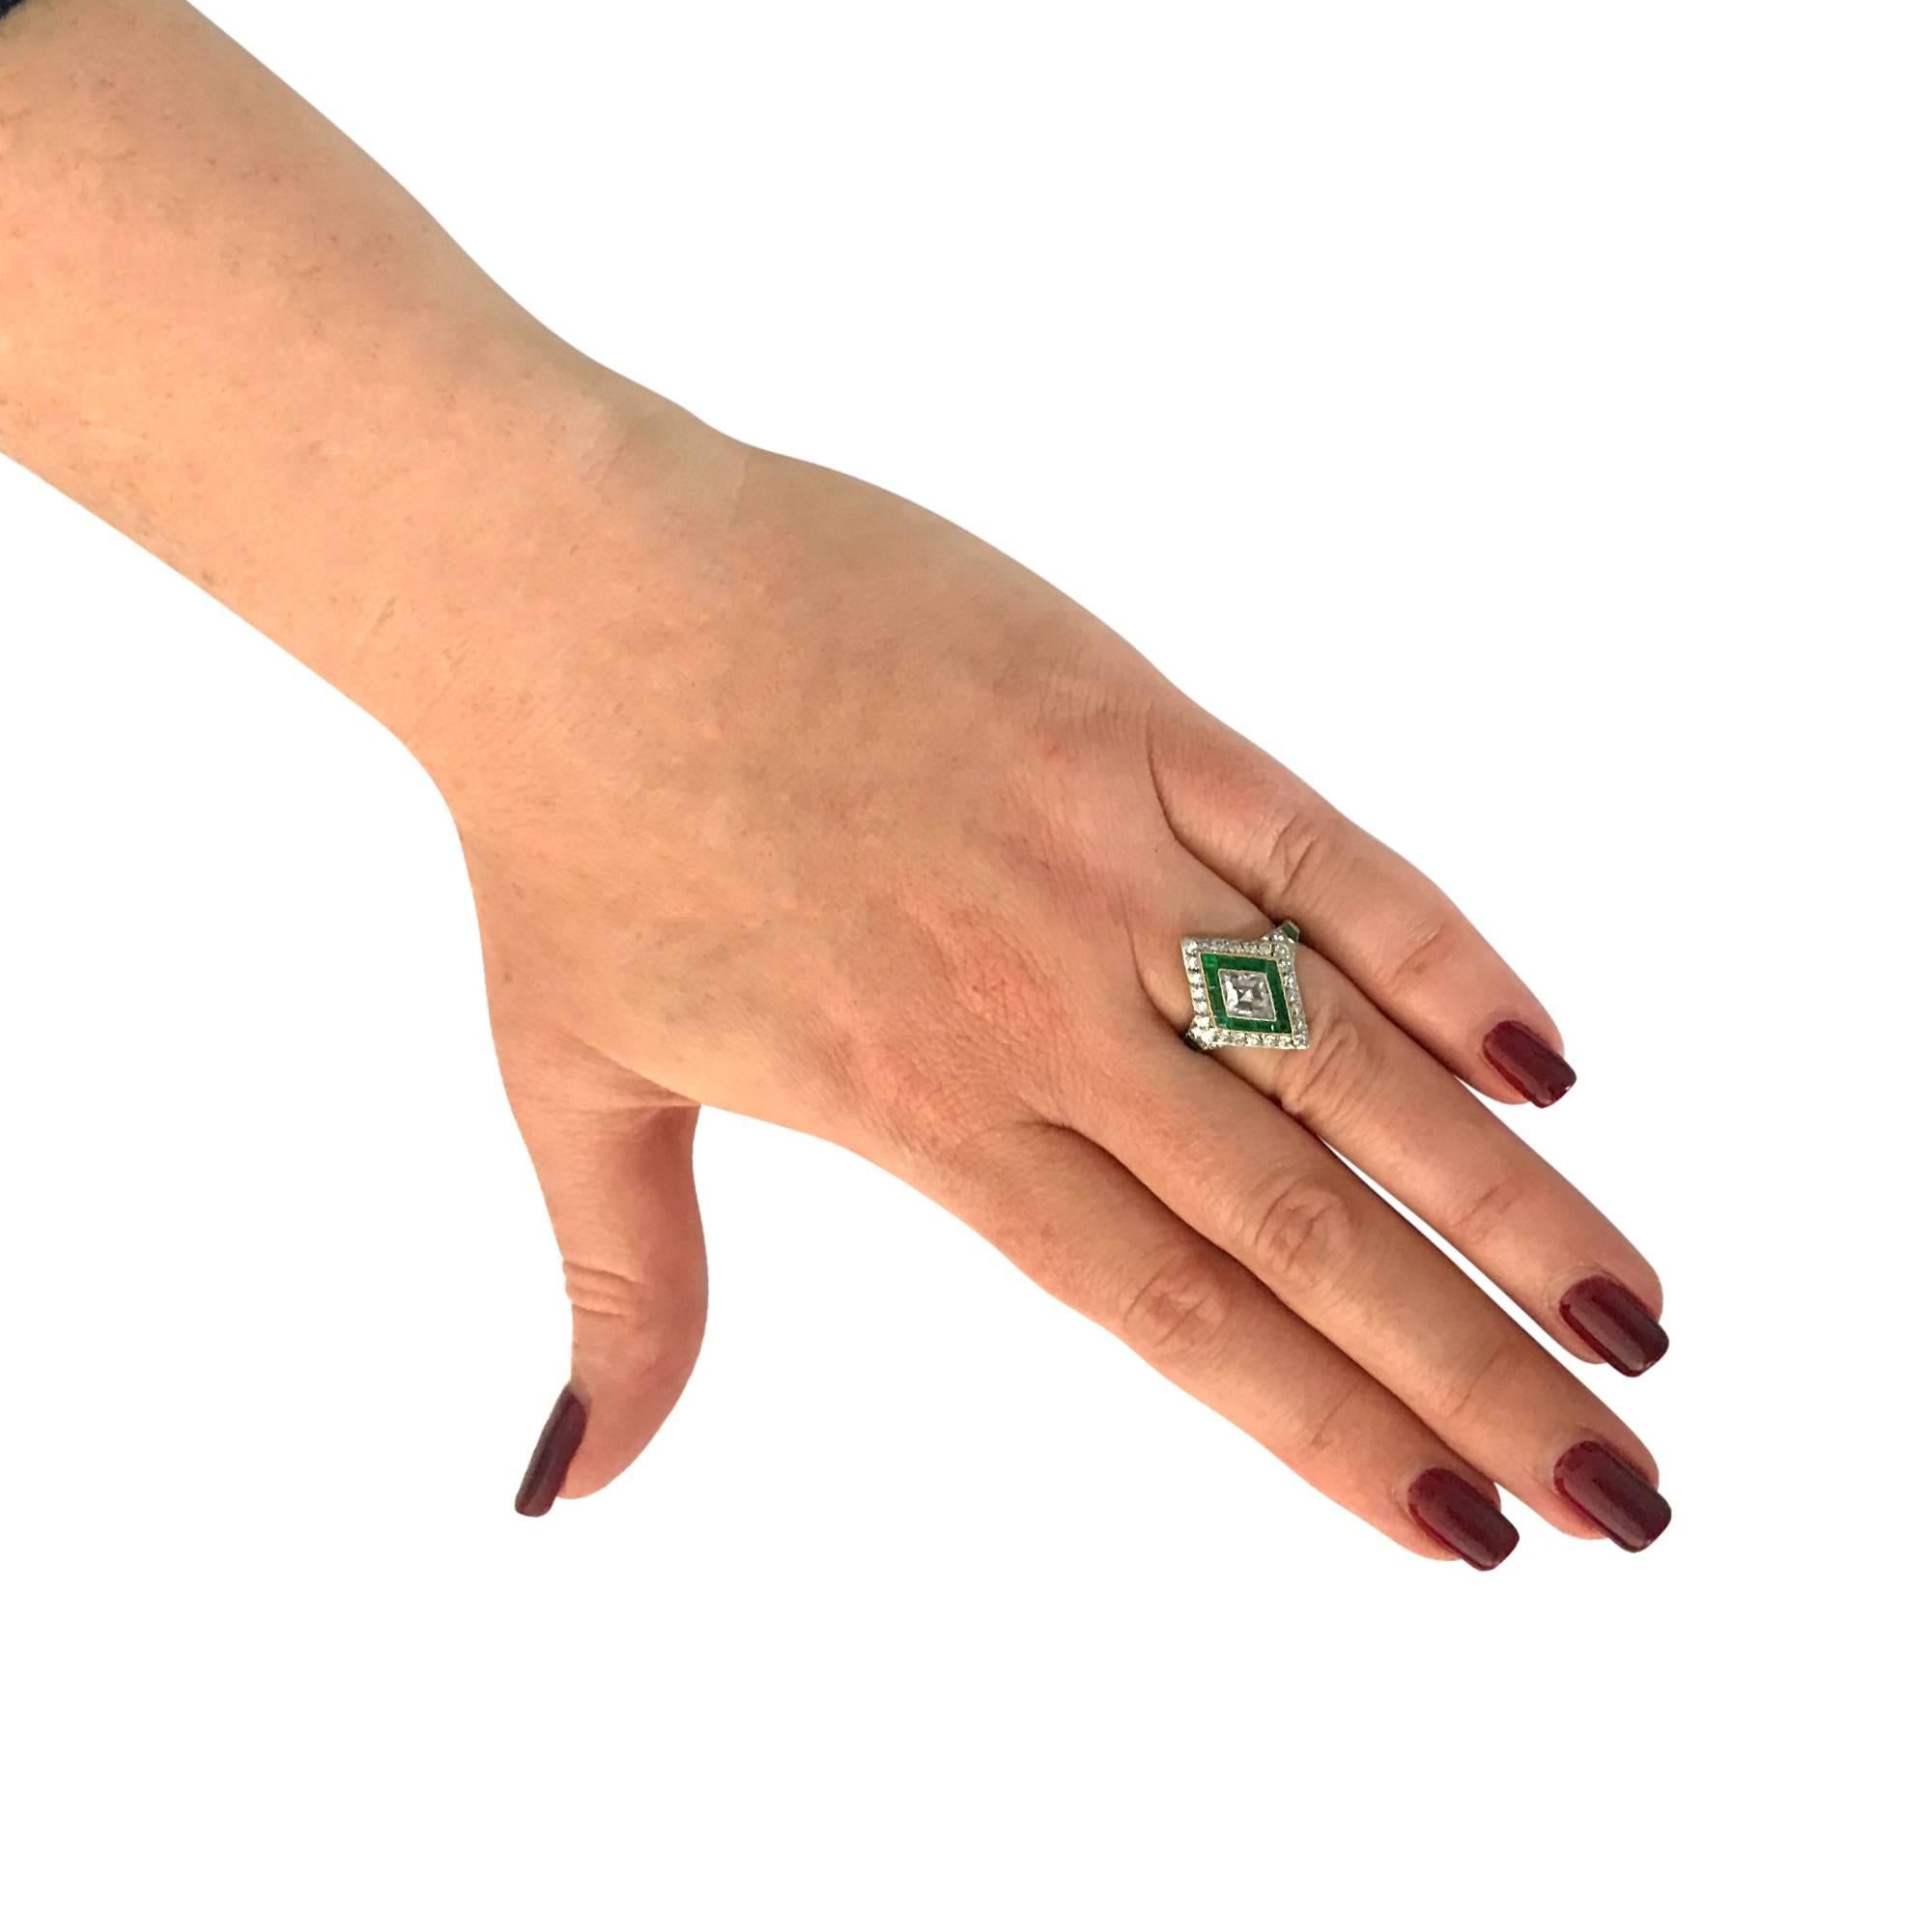 Art Deco inspired ring featuring an Antique rombus cut diamond weighing .85 carat G-H color, VS-SI clarity, set in platinum and framed with milgrain. The diamond rests on a bed of 12 vivid green custom cut emeralds, weighing approximately 1 carat